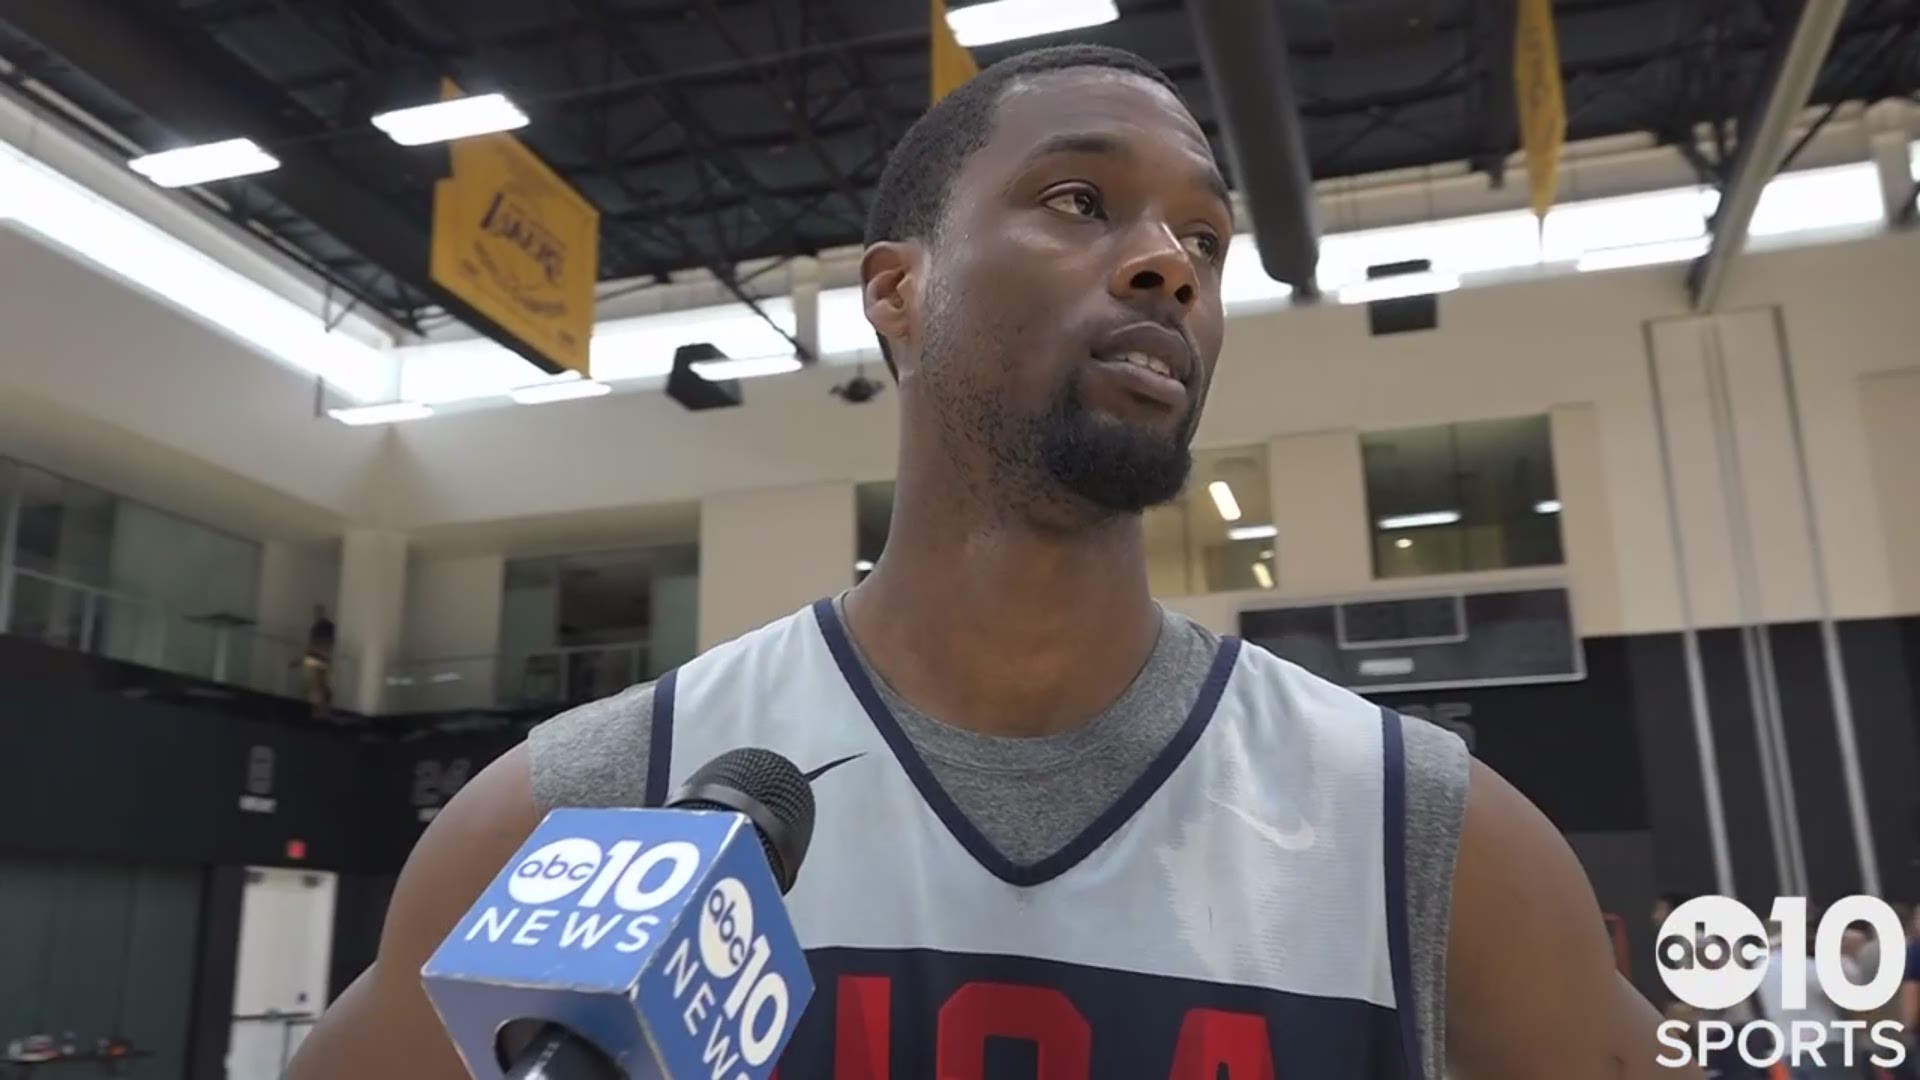 Kings forward Harrison Barnes talks about the challenges USA Basketball faces before facing Spain in Los Angeles, building chemistry with his Sacramento teammate De'Aaron Fox and the decision by Marvin Bagley III to withdraw from Team USA.